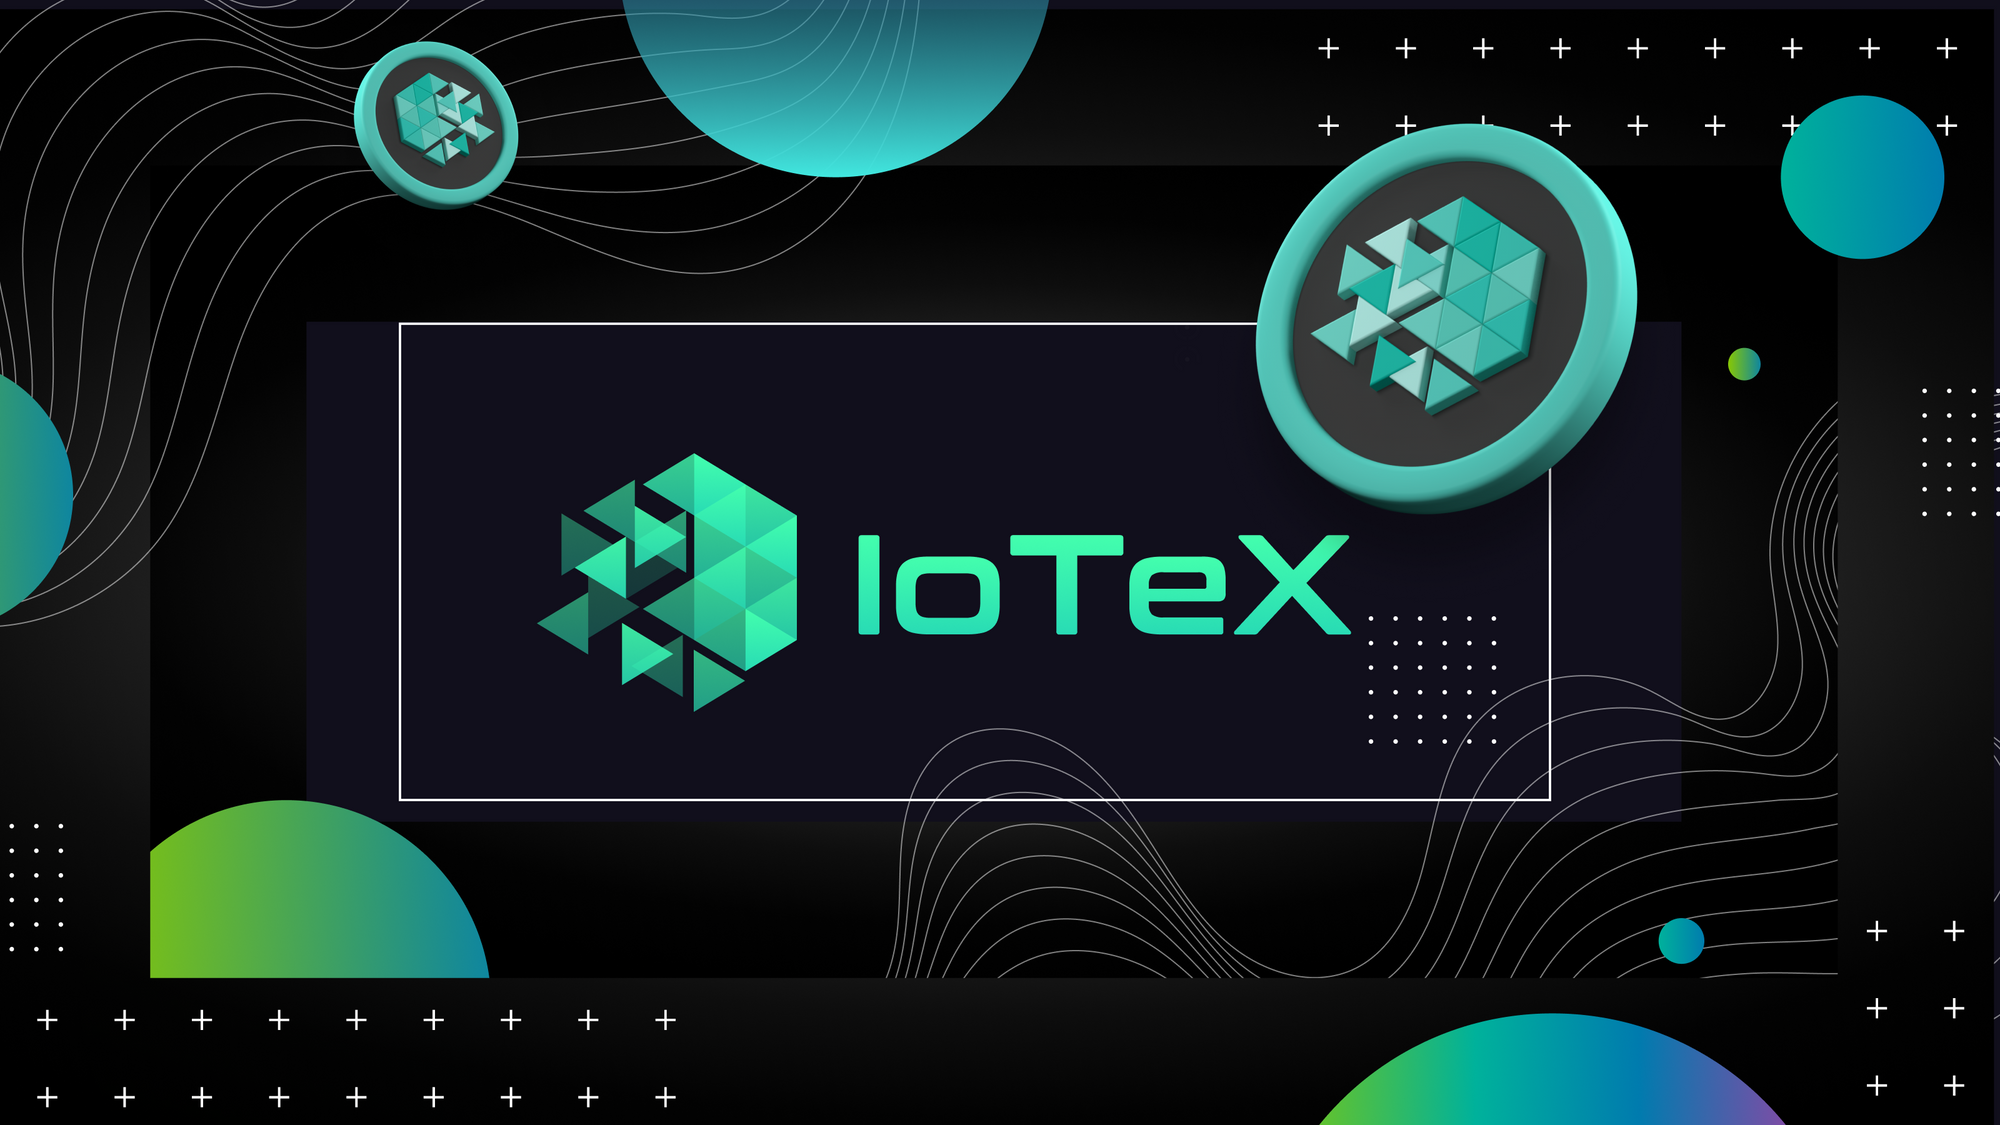 IoTeX Explained: Latest Review of How It Works